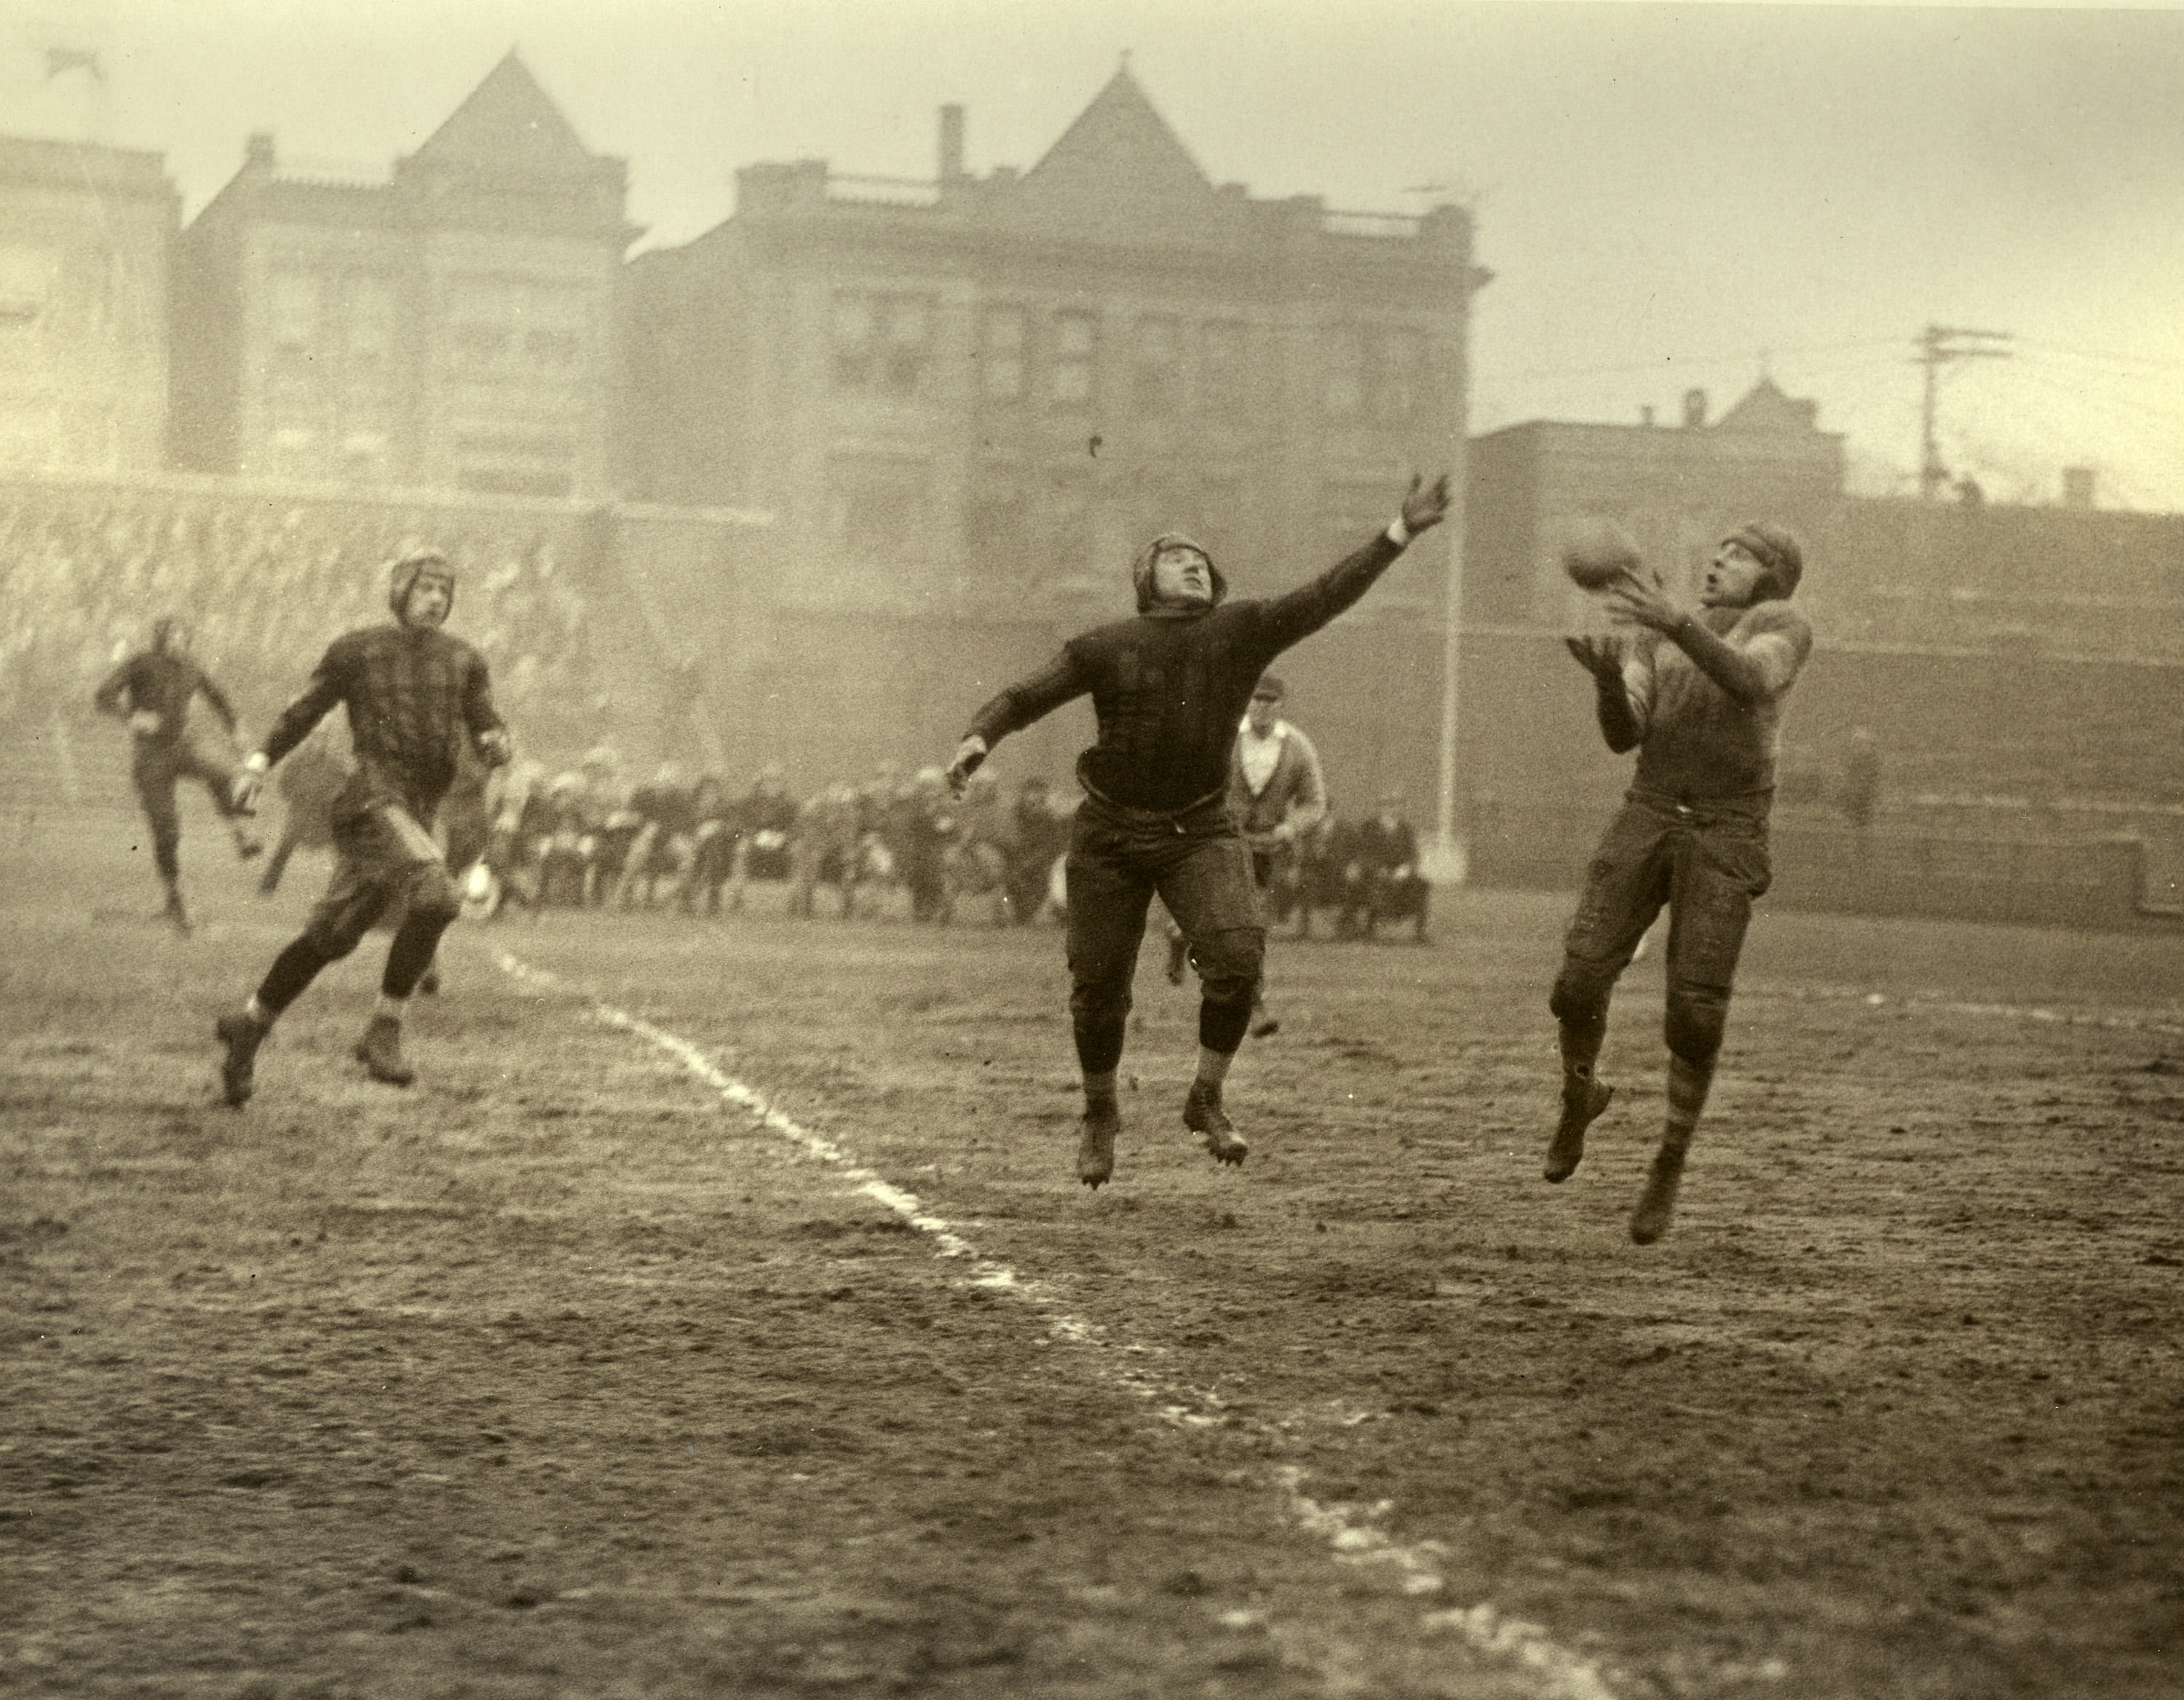 The Chicago Bears play in a game during the 1920s.